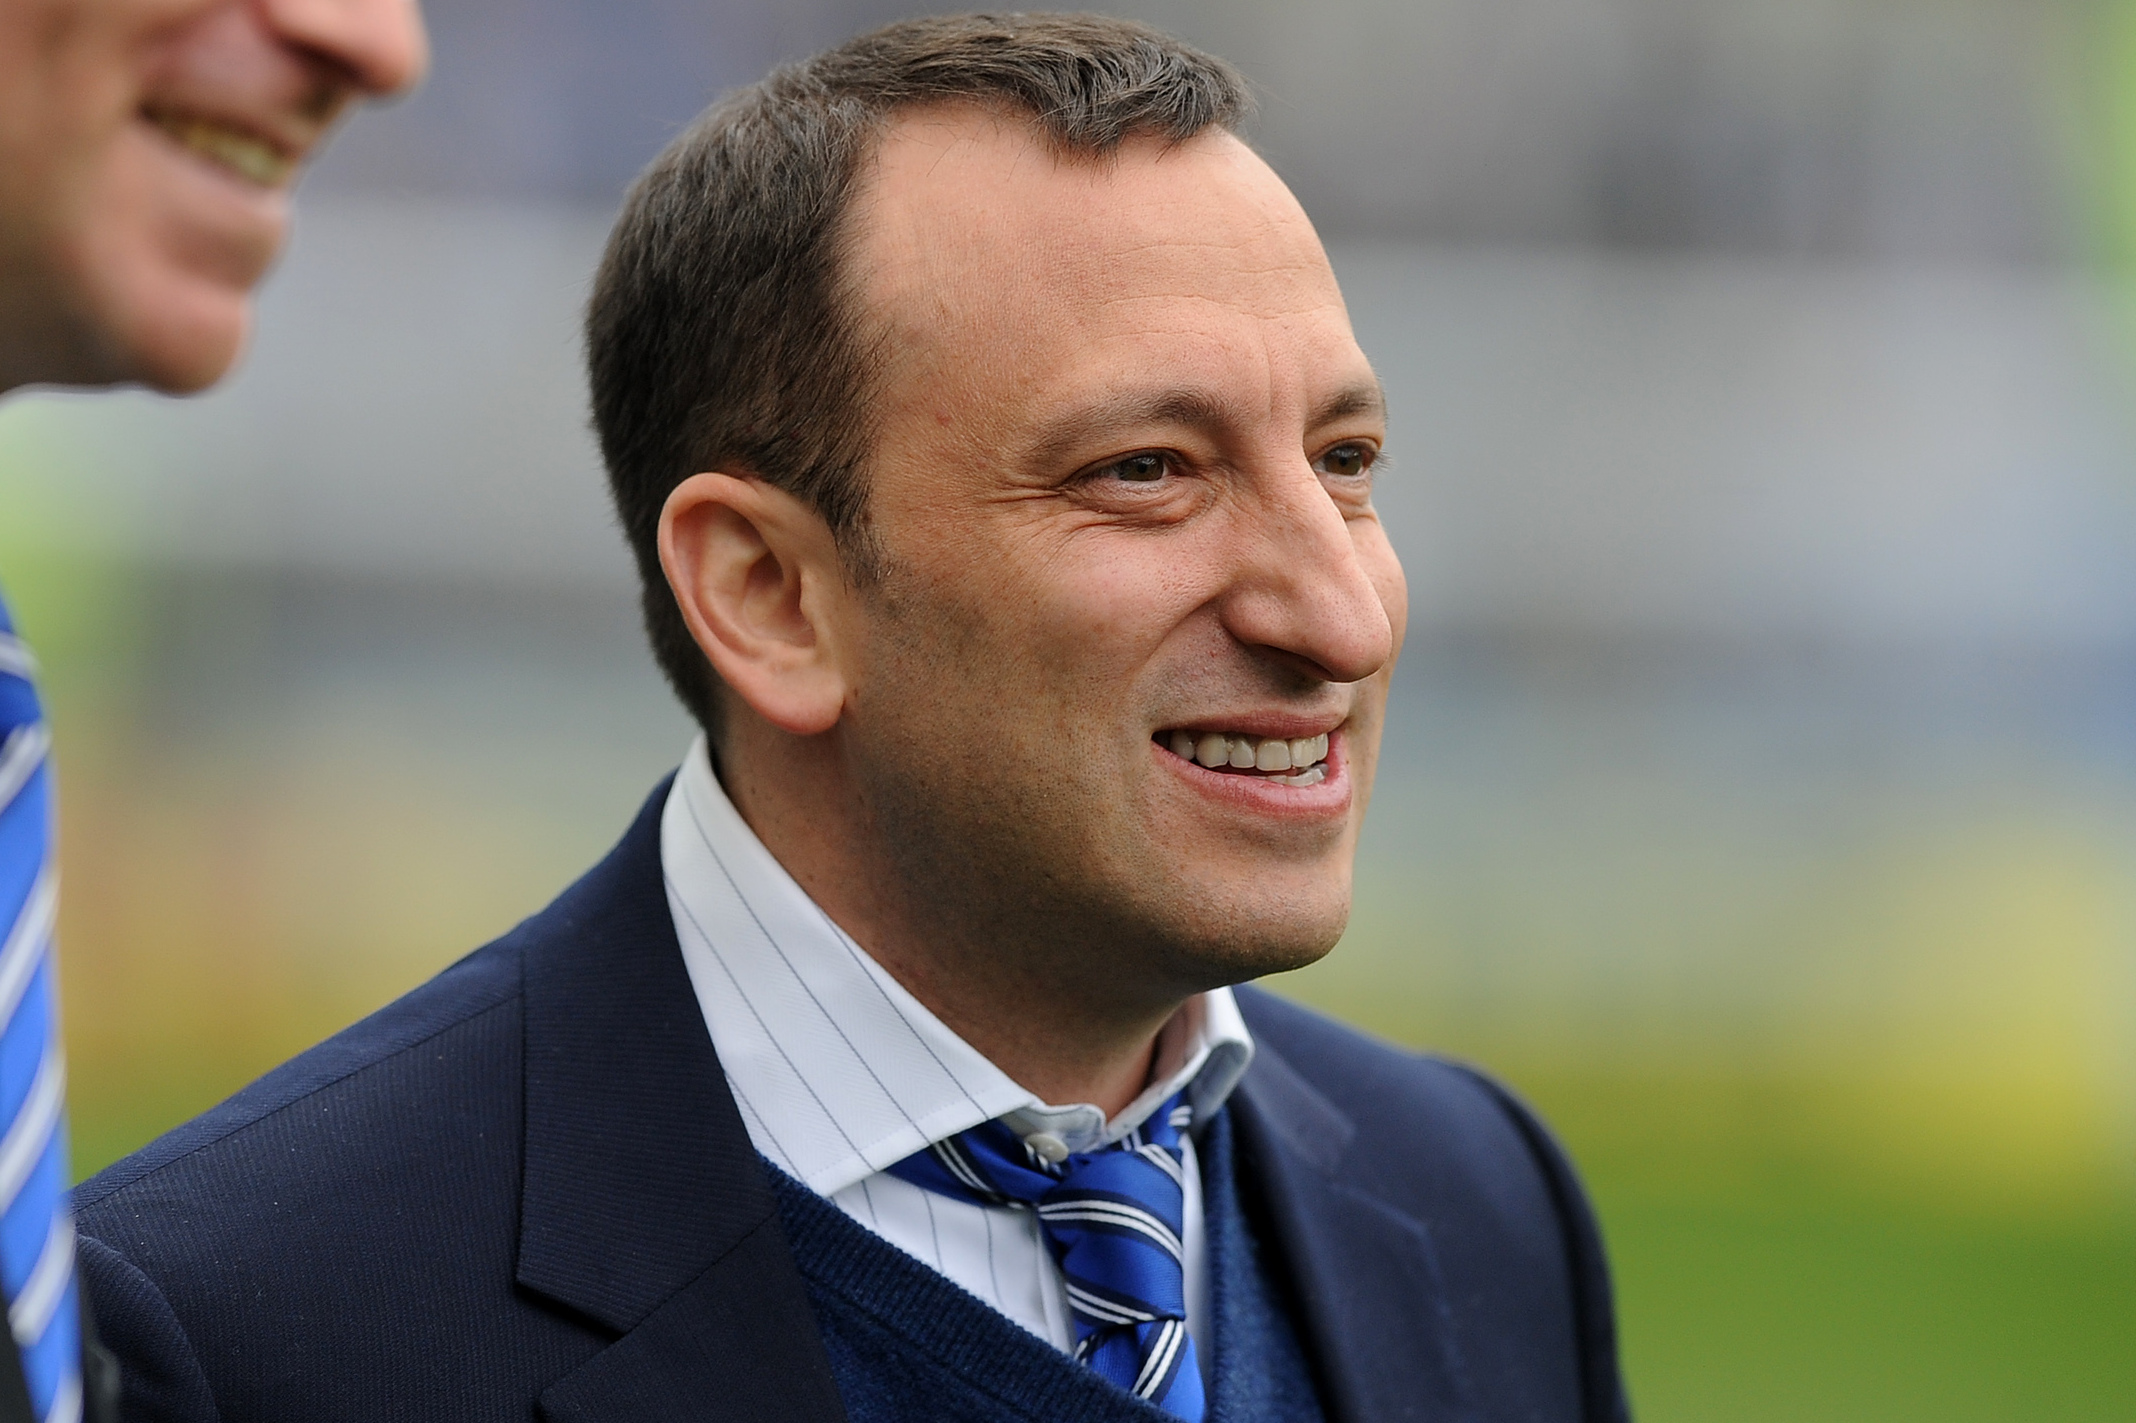 Tony Bloom wearing a blue suit on a white shirt and laughing